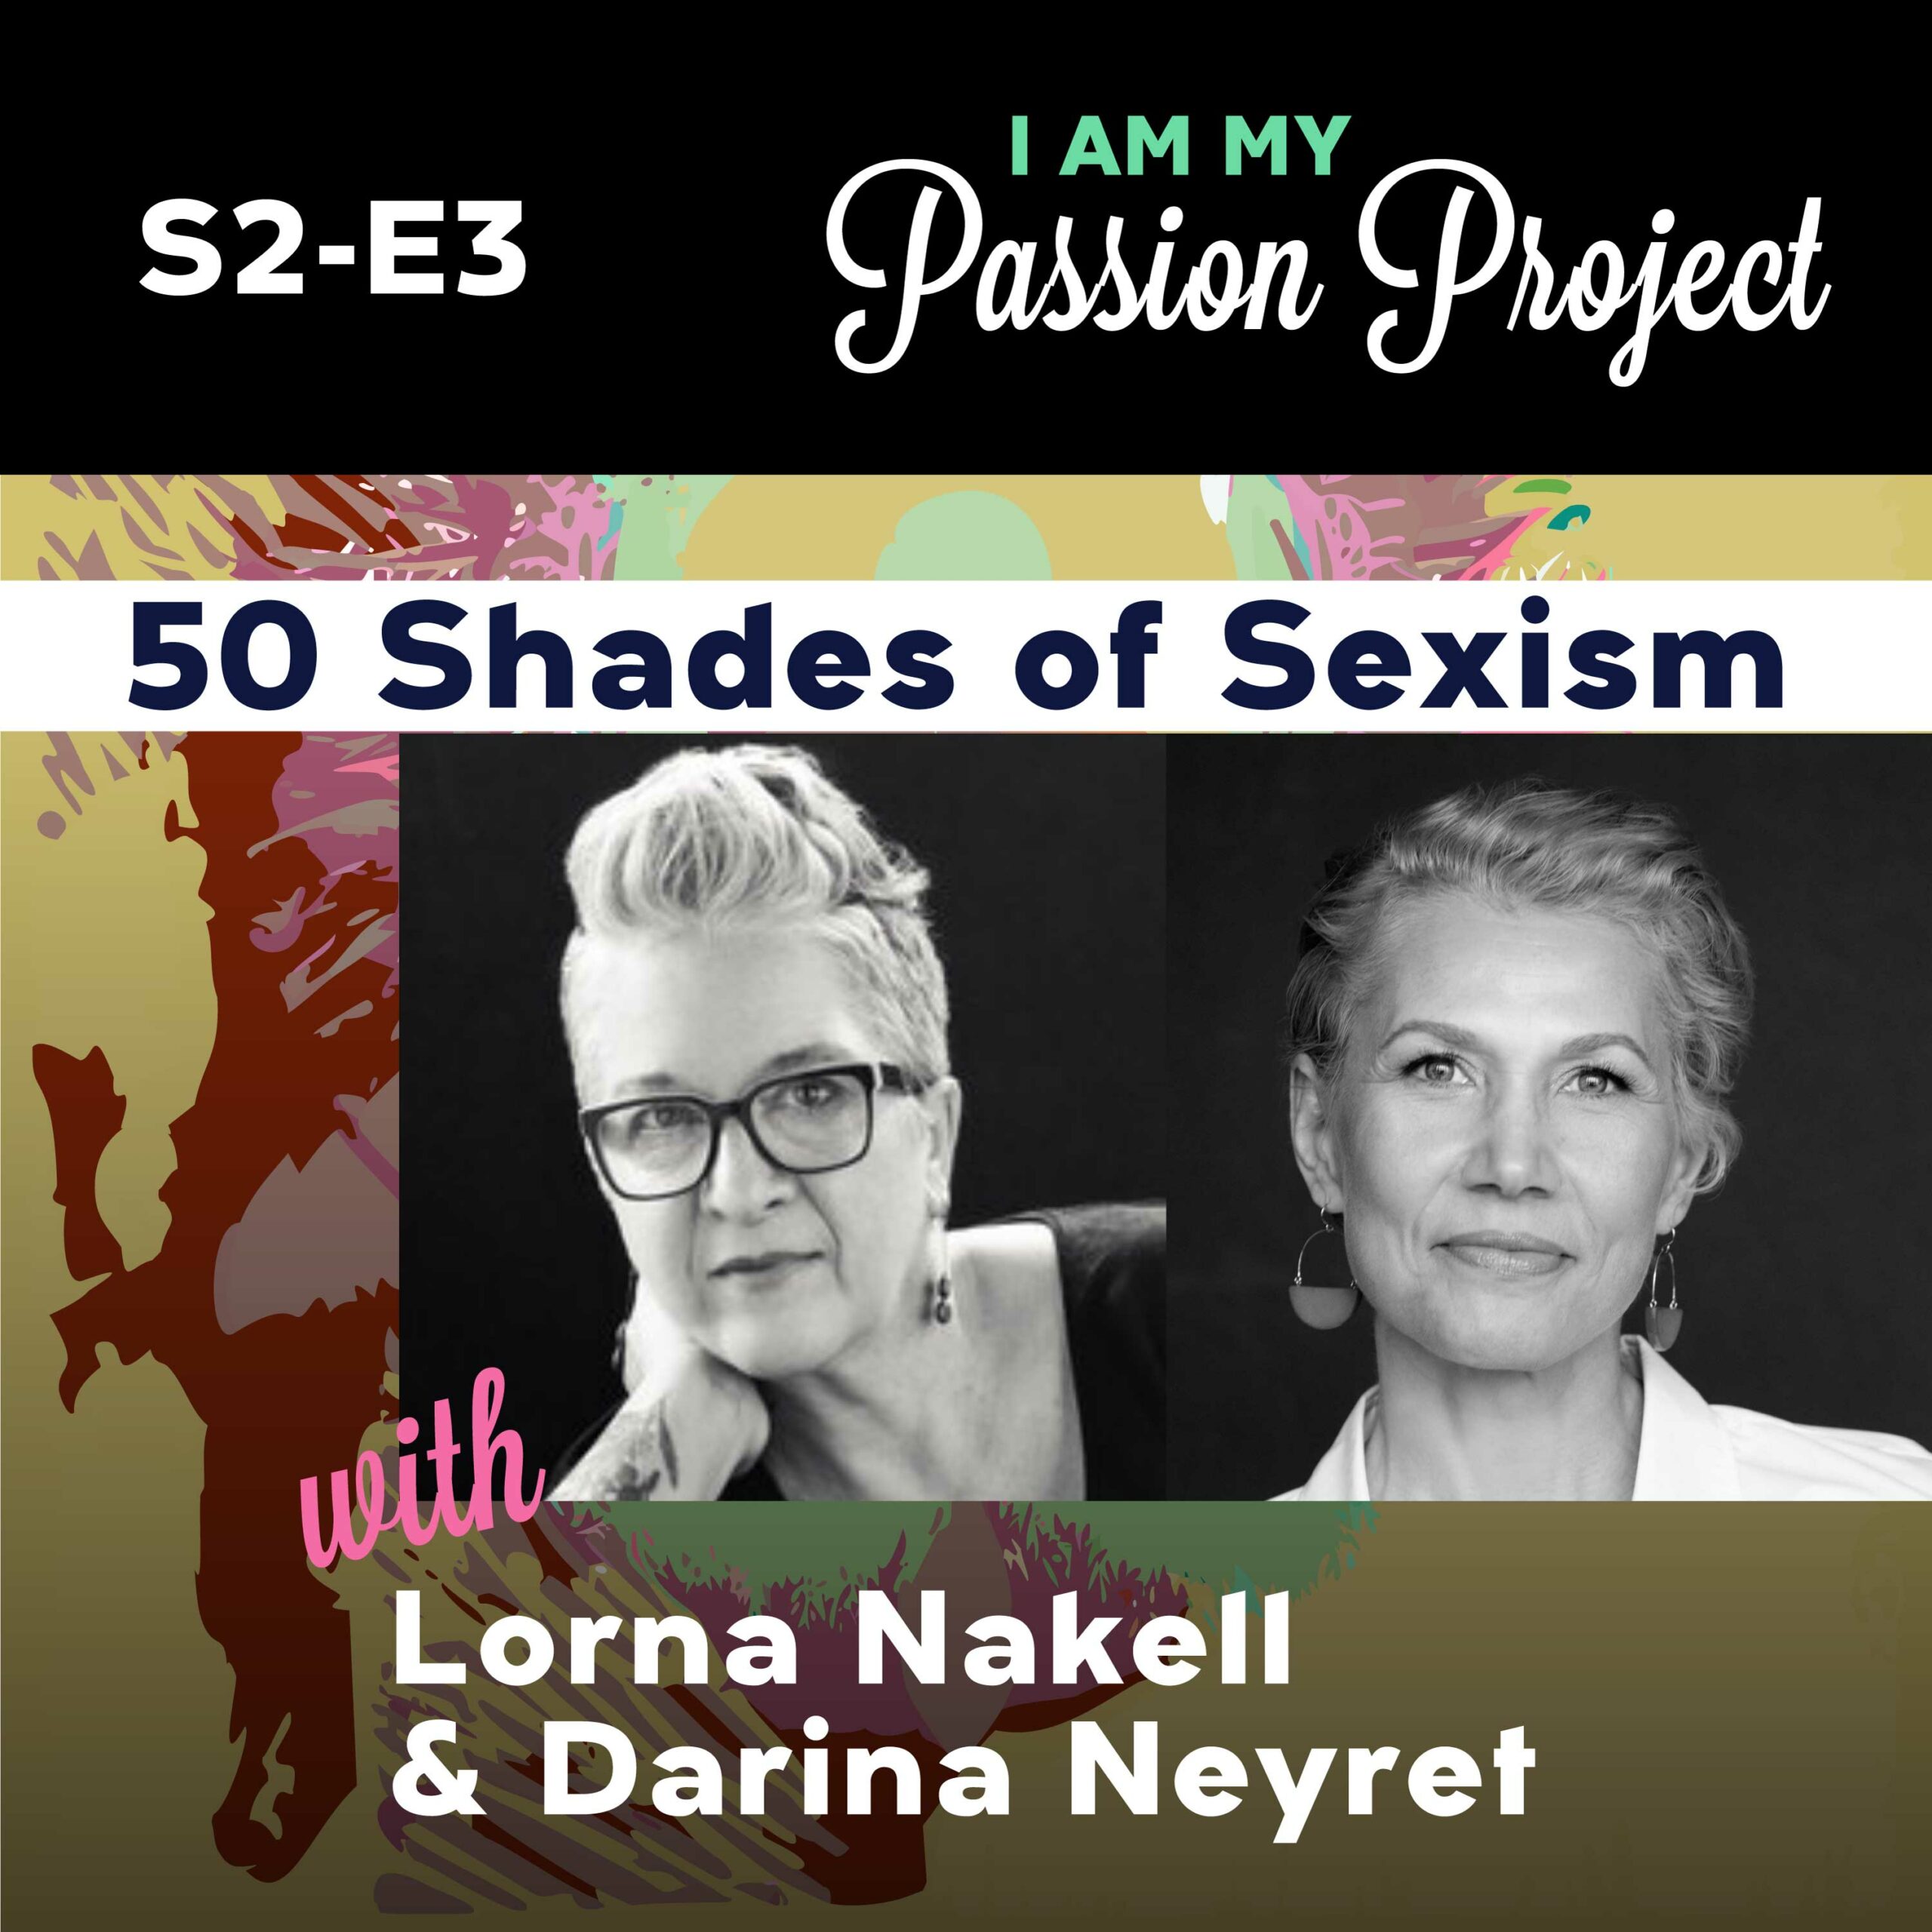 50 Shades of Sexism Reviews the Movie, Love Actually (part 2) with Lorna Nakell and Darina Neyret